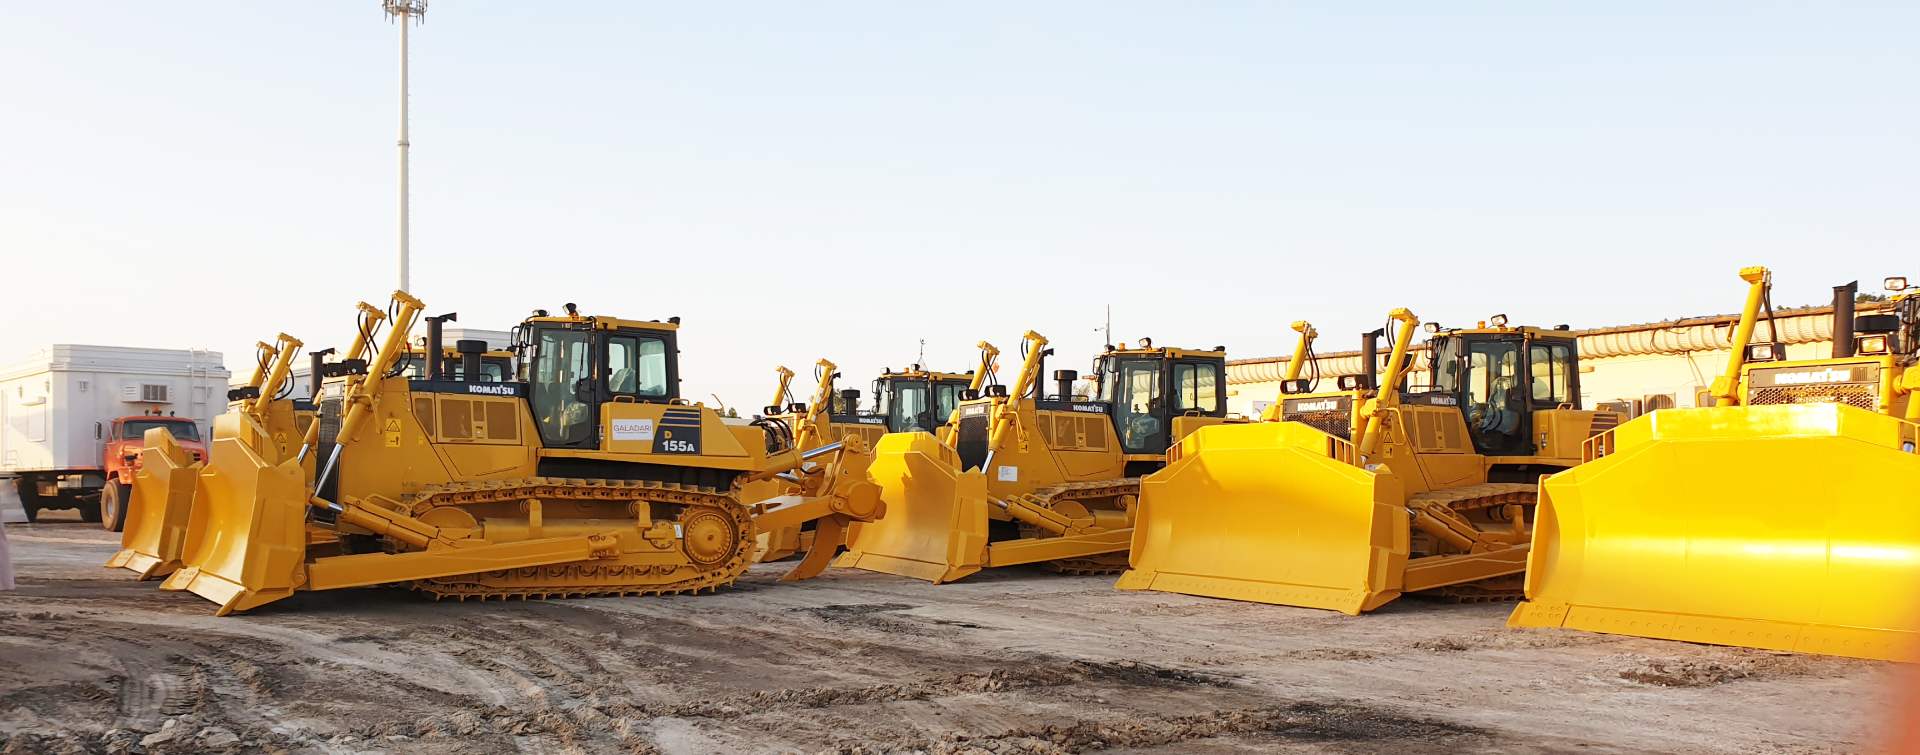 earth-moving-equipment